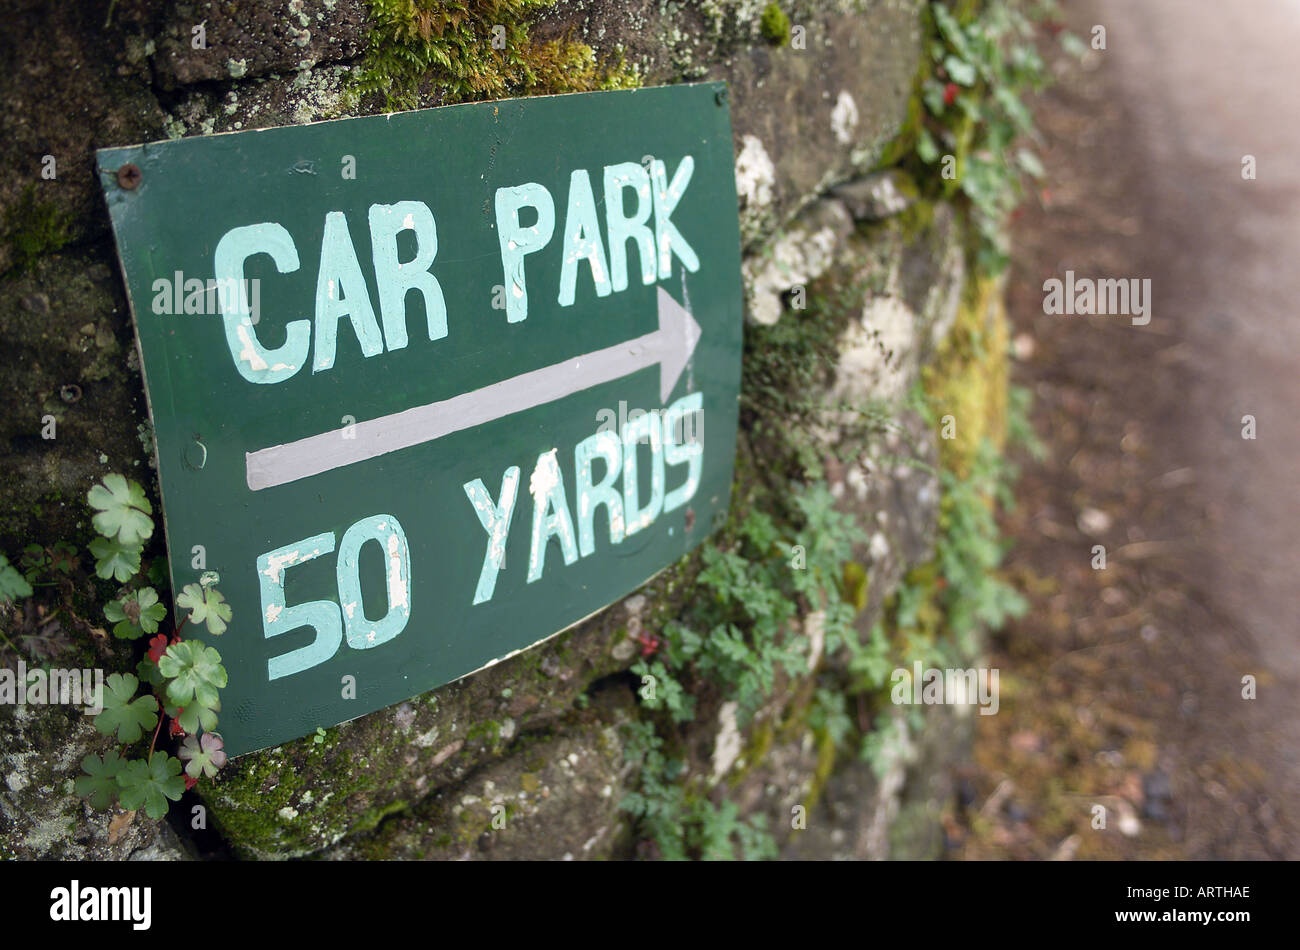 Rural hotel car park sign with arrow, in imperial measurement (yards). Stock Photo